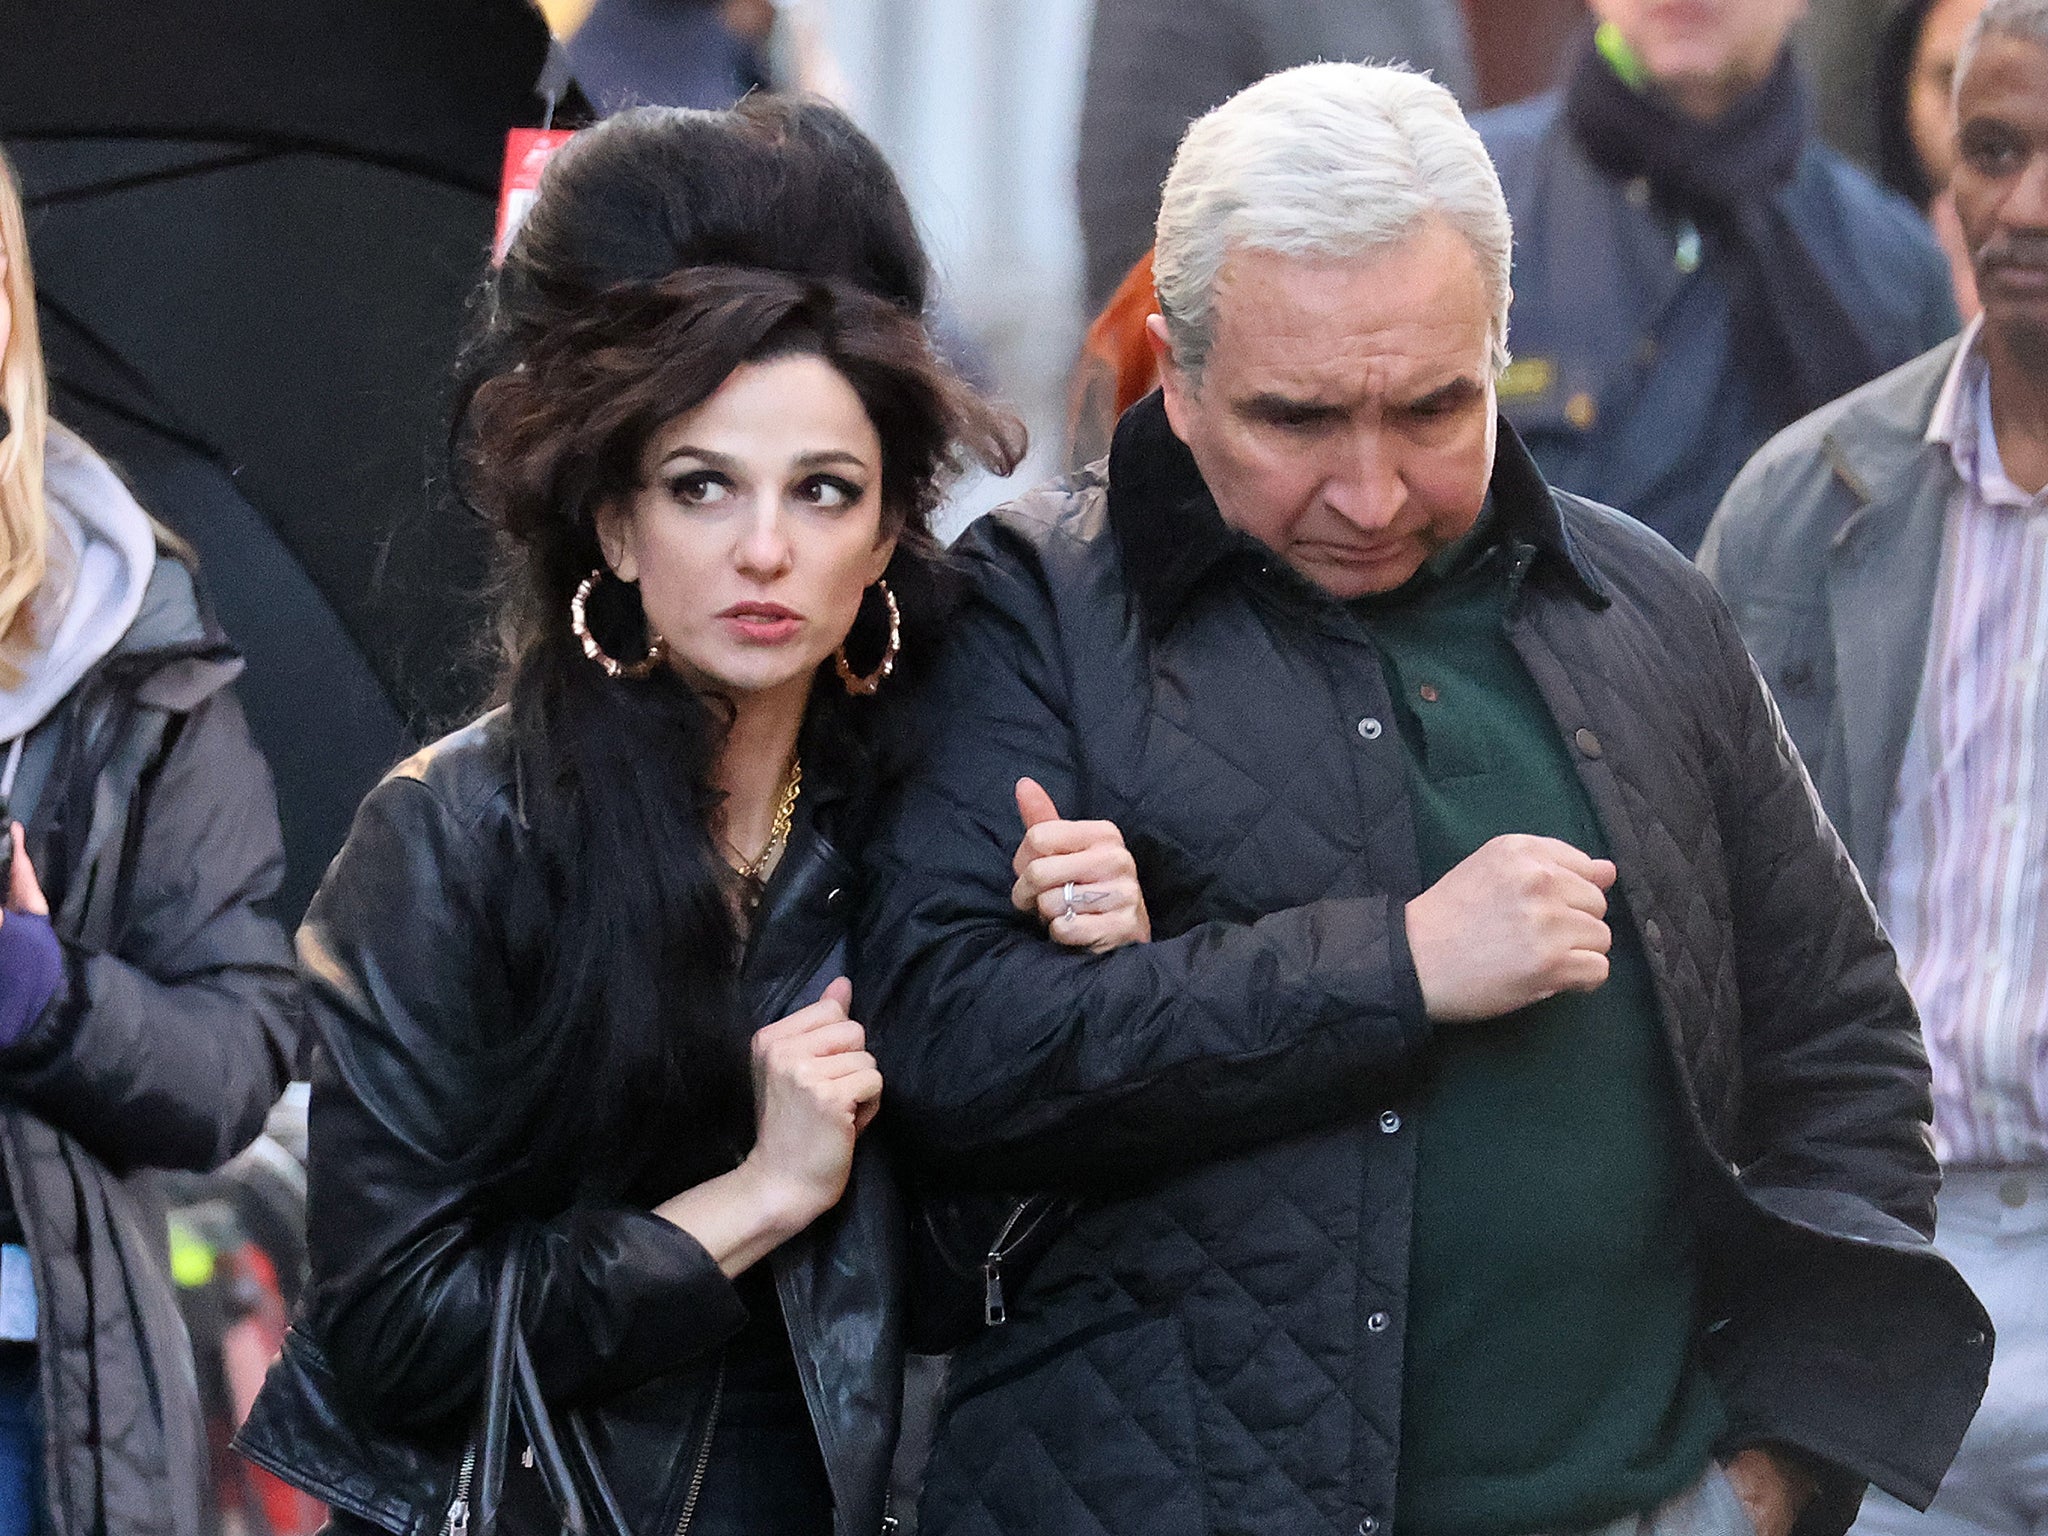 Marisa Abela as Amy Winehouse and Eddie Marsan as her father Mitch filming the new Amy Winehouse biopic ‘Back to Black’